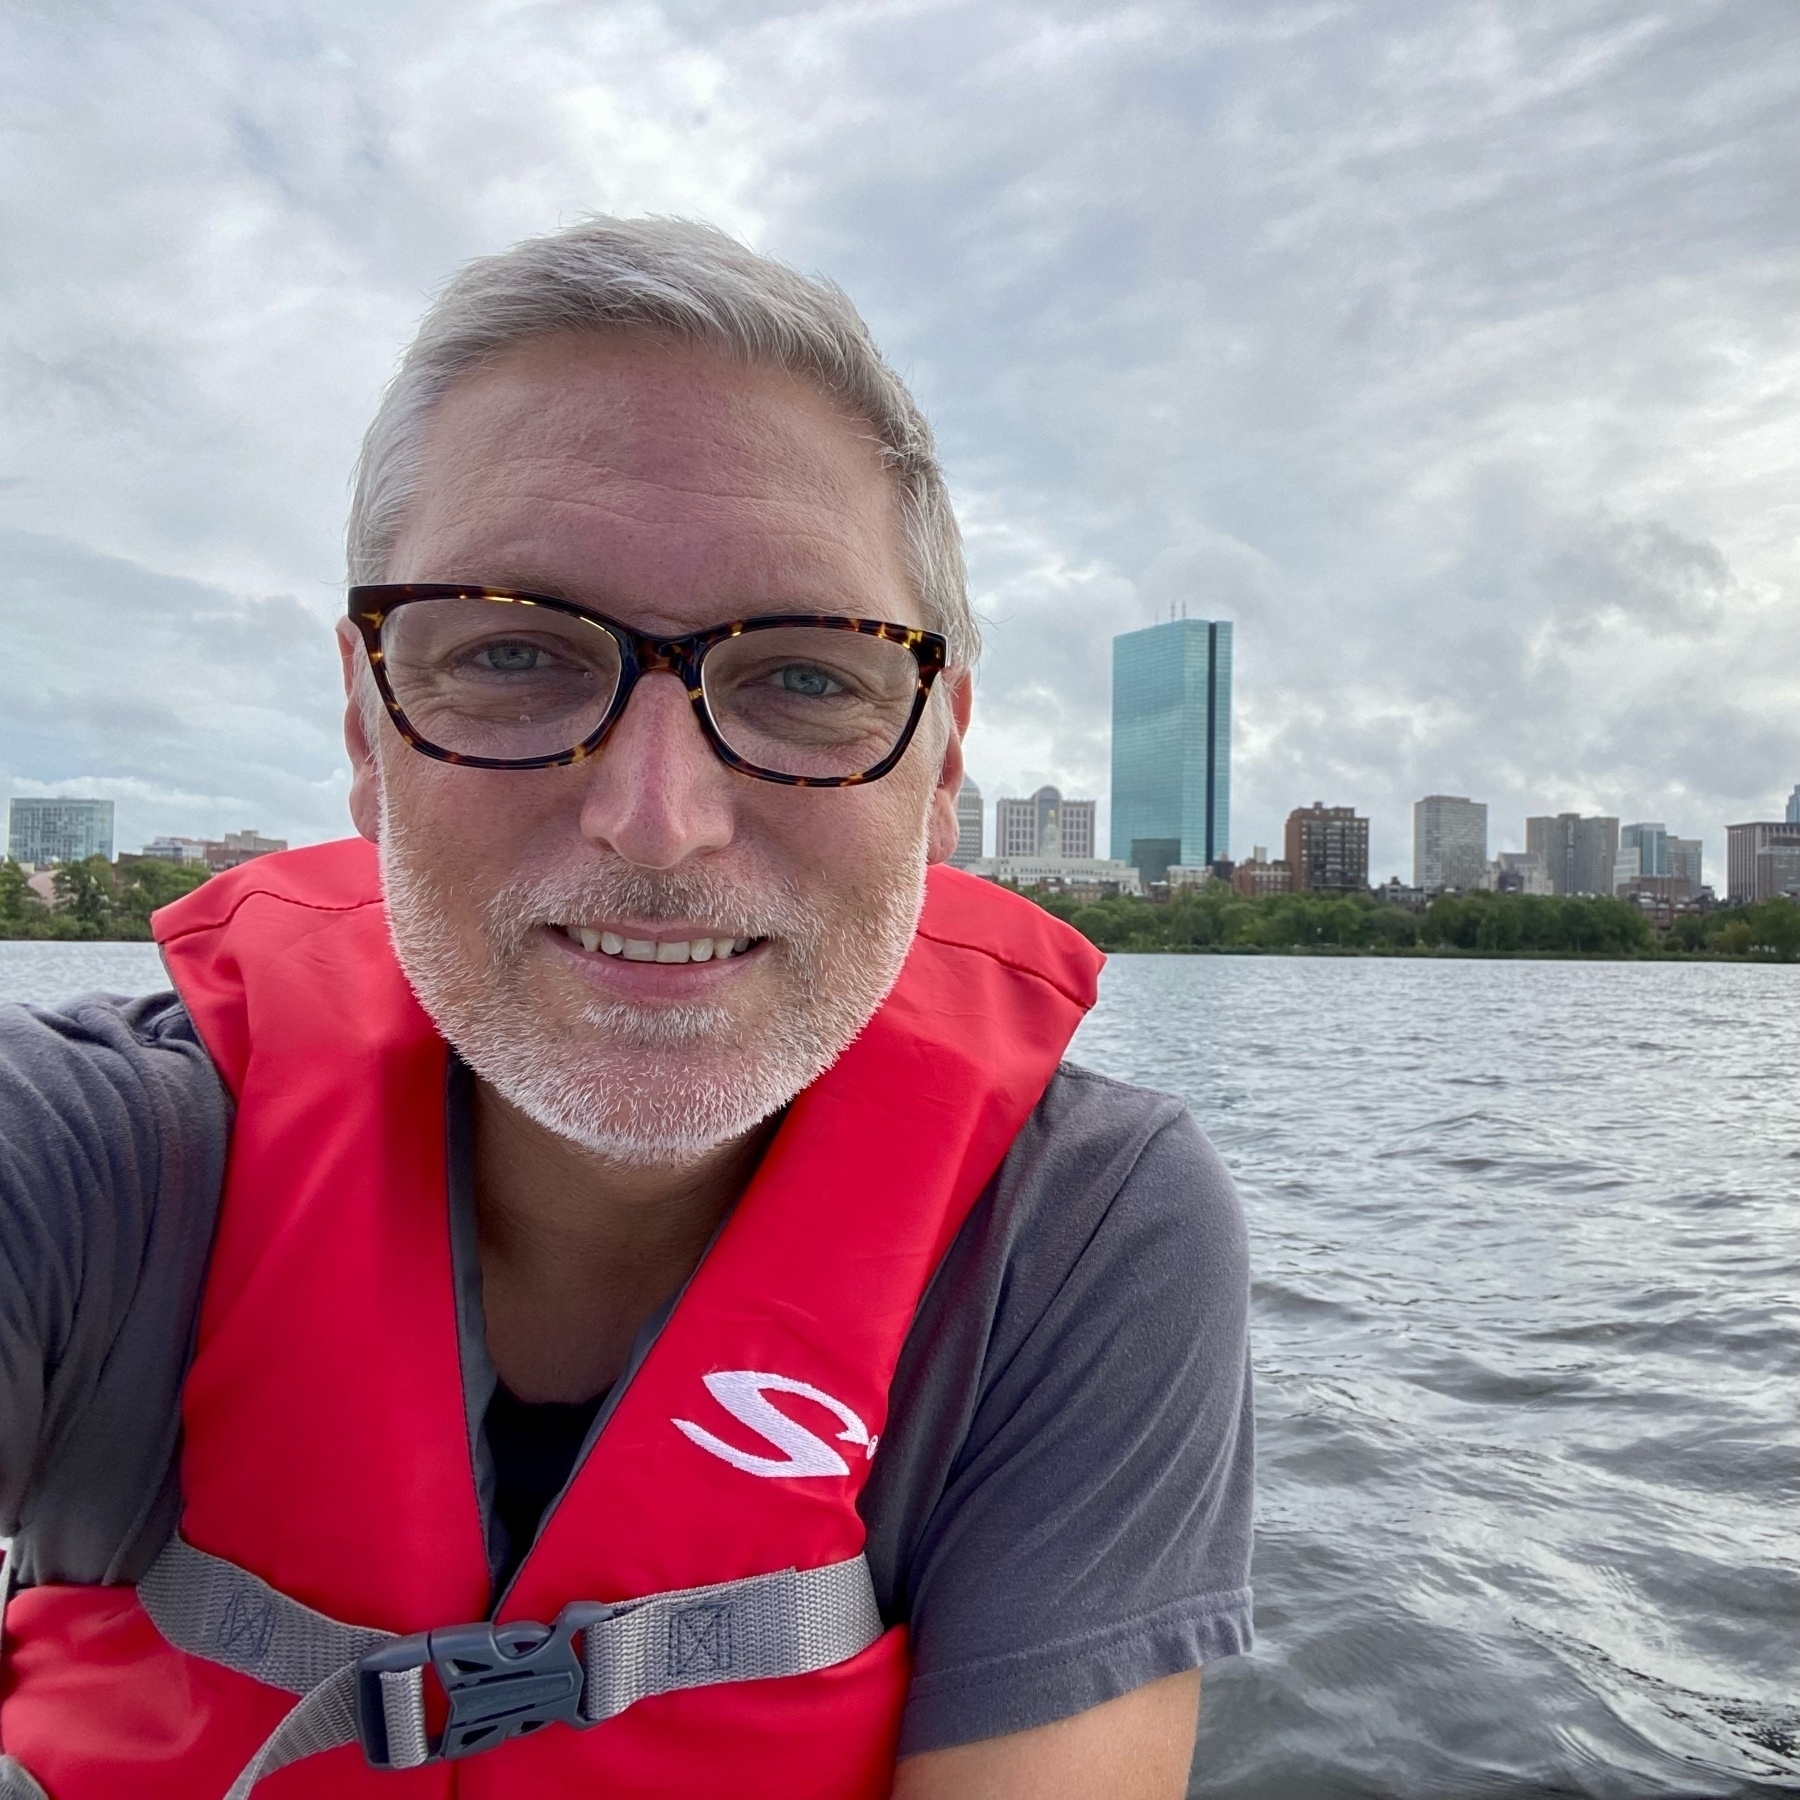 Selfie on a sailboat with Boston skyline behind me.